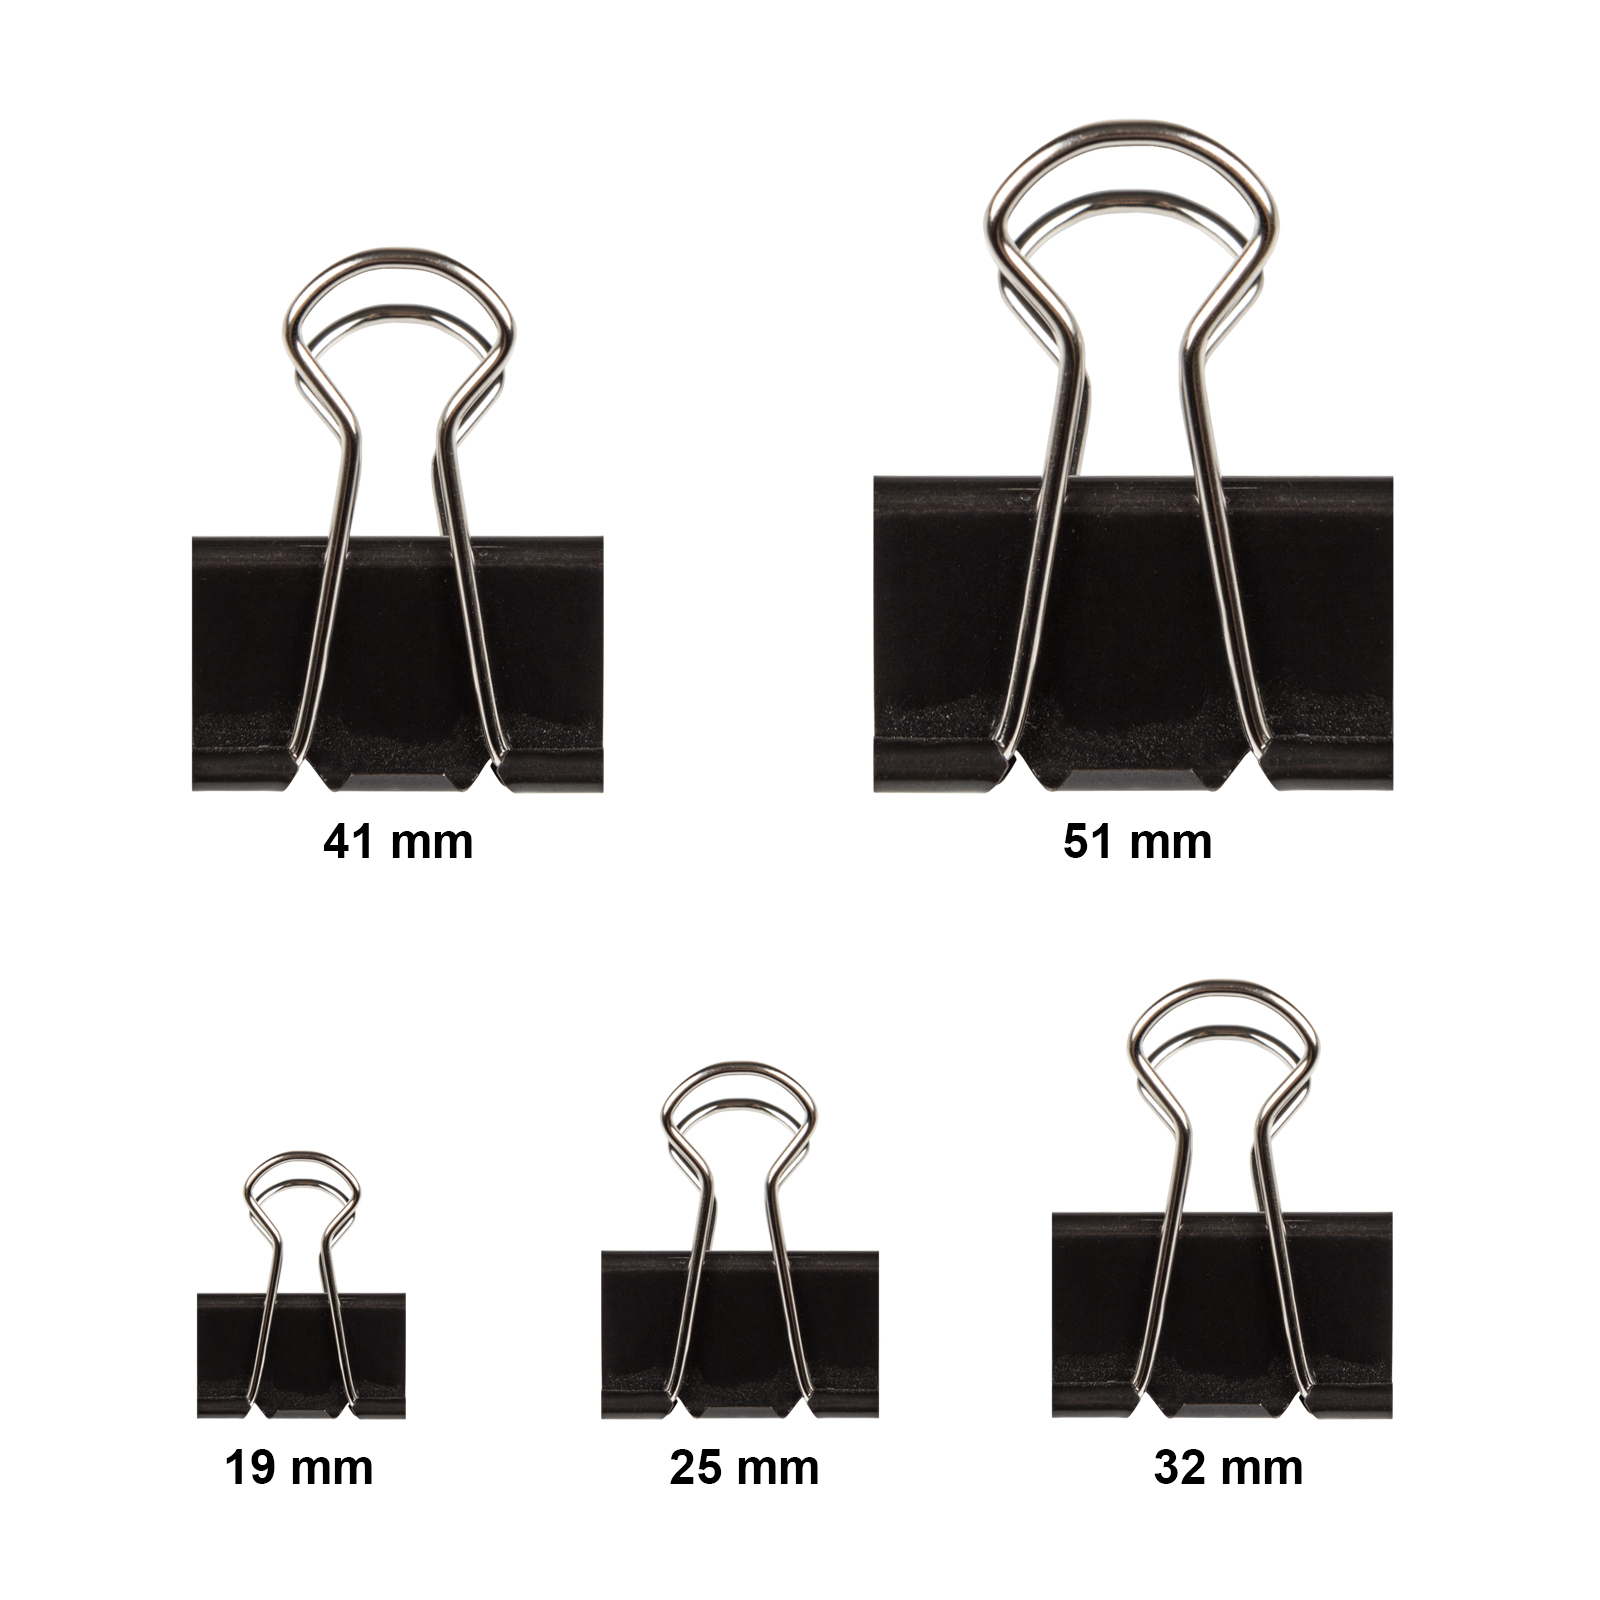 Nopea Clamp Nylon Background Clips Glue Clamps Spring Clamp Binder Clip Multi-Purpose Clips for Hanging Canvas Photography Reflectors Screens and Other Crafts Pack of 10 